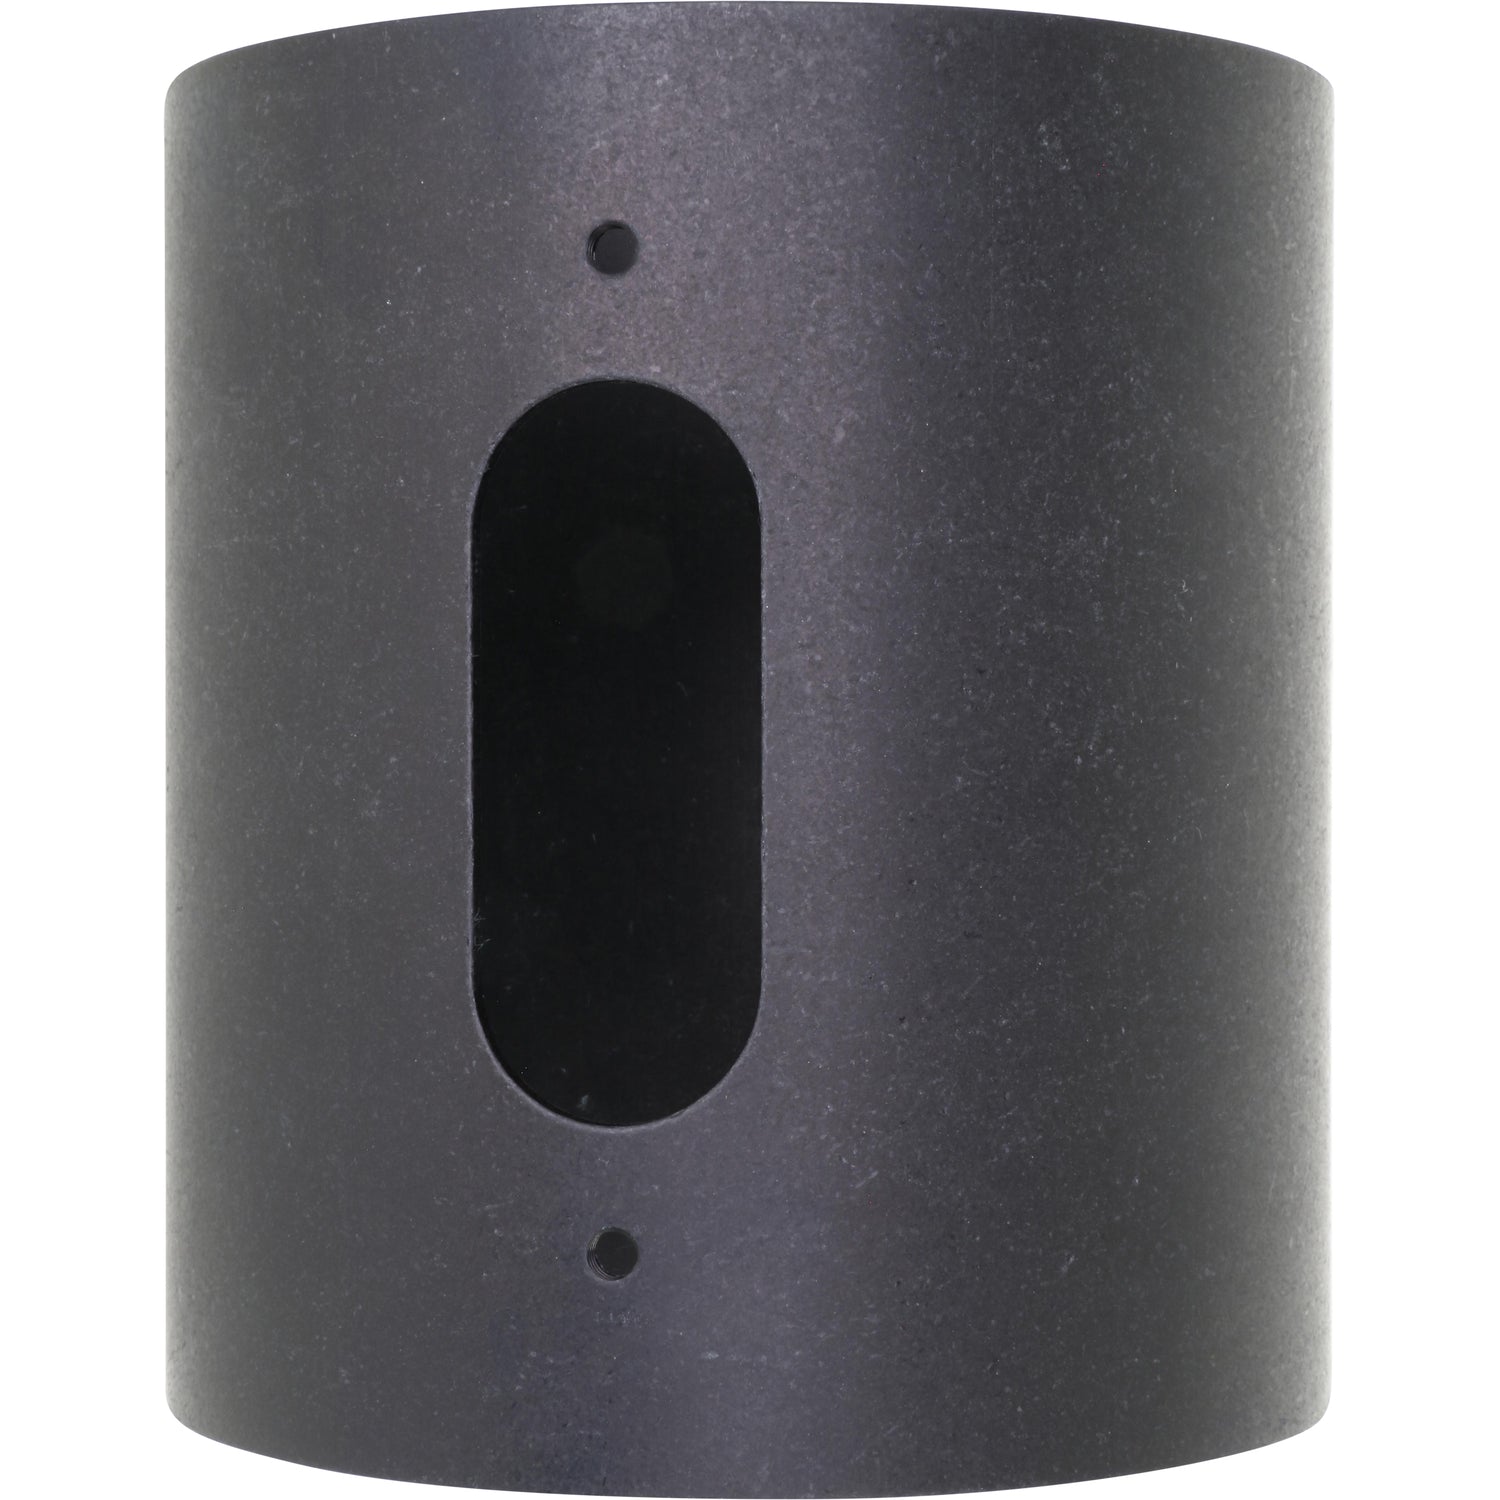 Cylindrical black anodized aluminum part with oval window on side. Part shown on white background. 